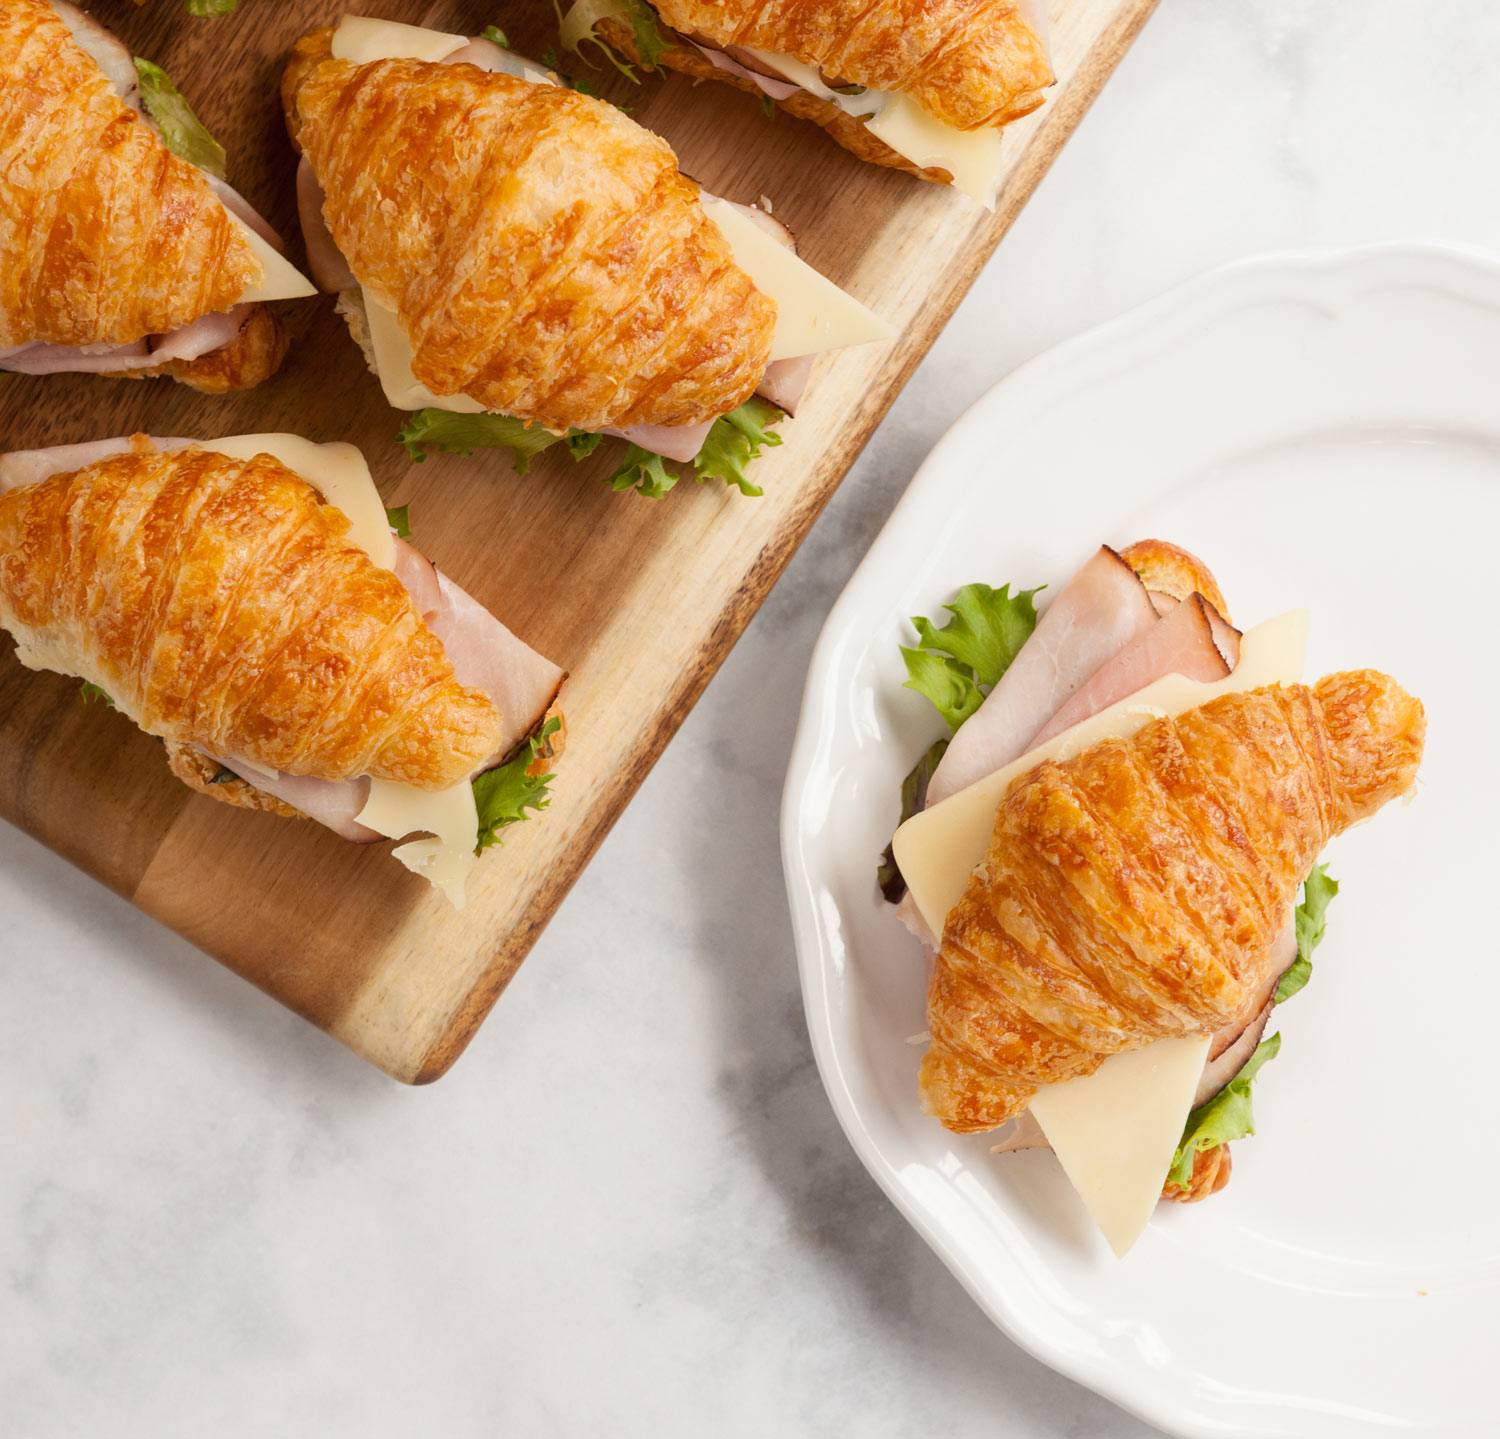 Food_Photography__Catering_trays_sandwhiches_to_go_turkey_ham_cheese_lettuce_fresh_baked.jpg